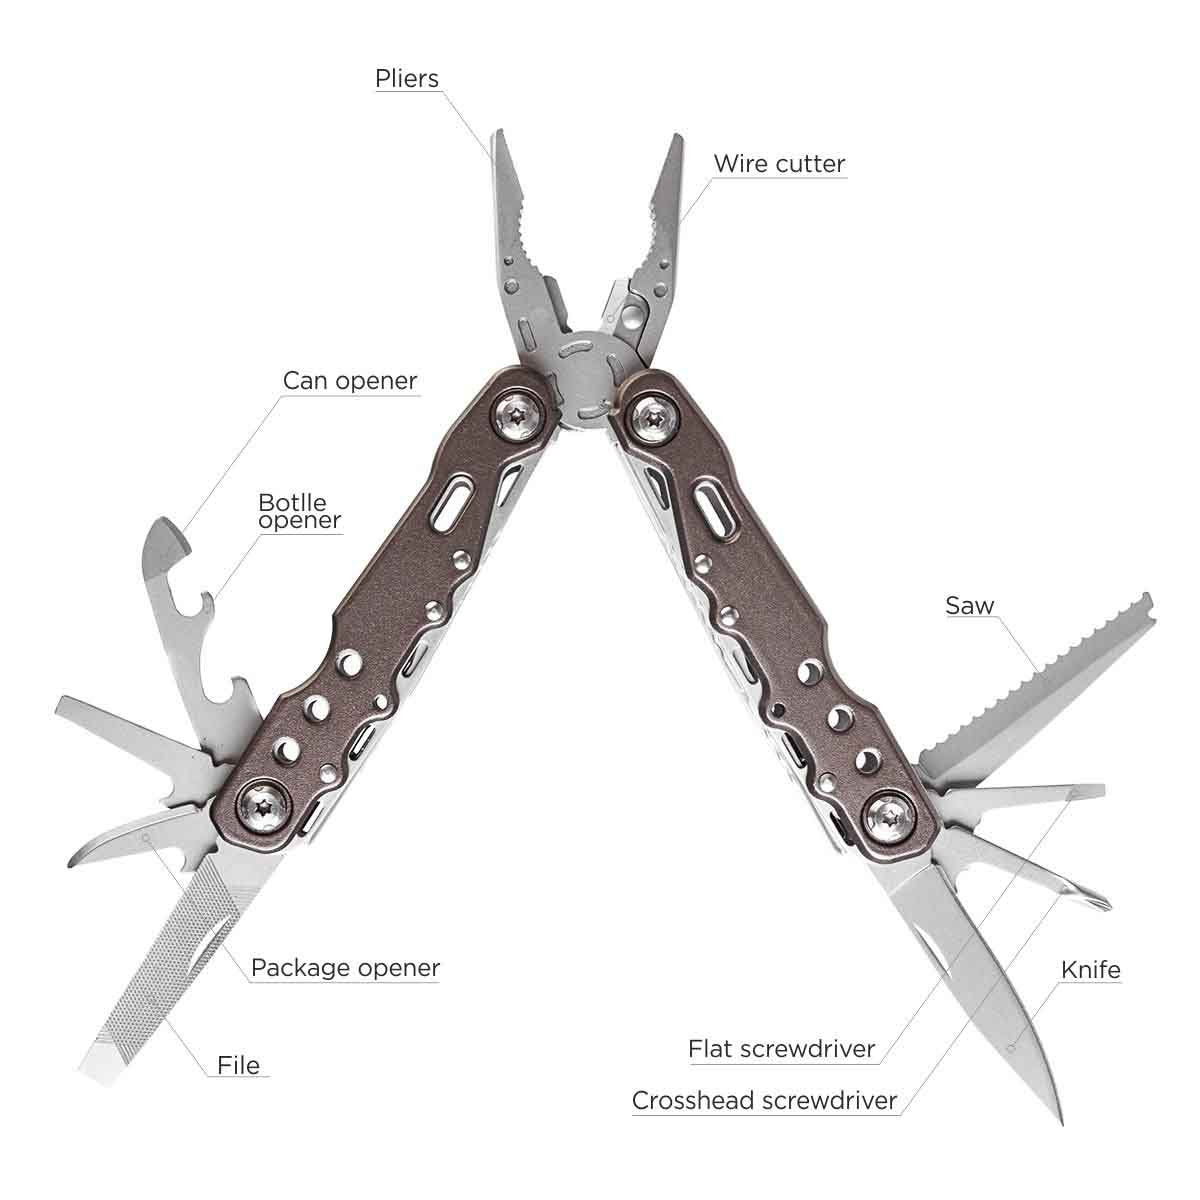 Compact 7-in-1 Pliers Multitool for Home and Outdoor contains pliers, wire cutter, can and bottle openers, file, knife, saw and flat screwdriver